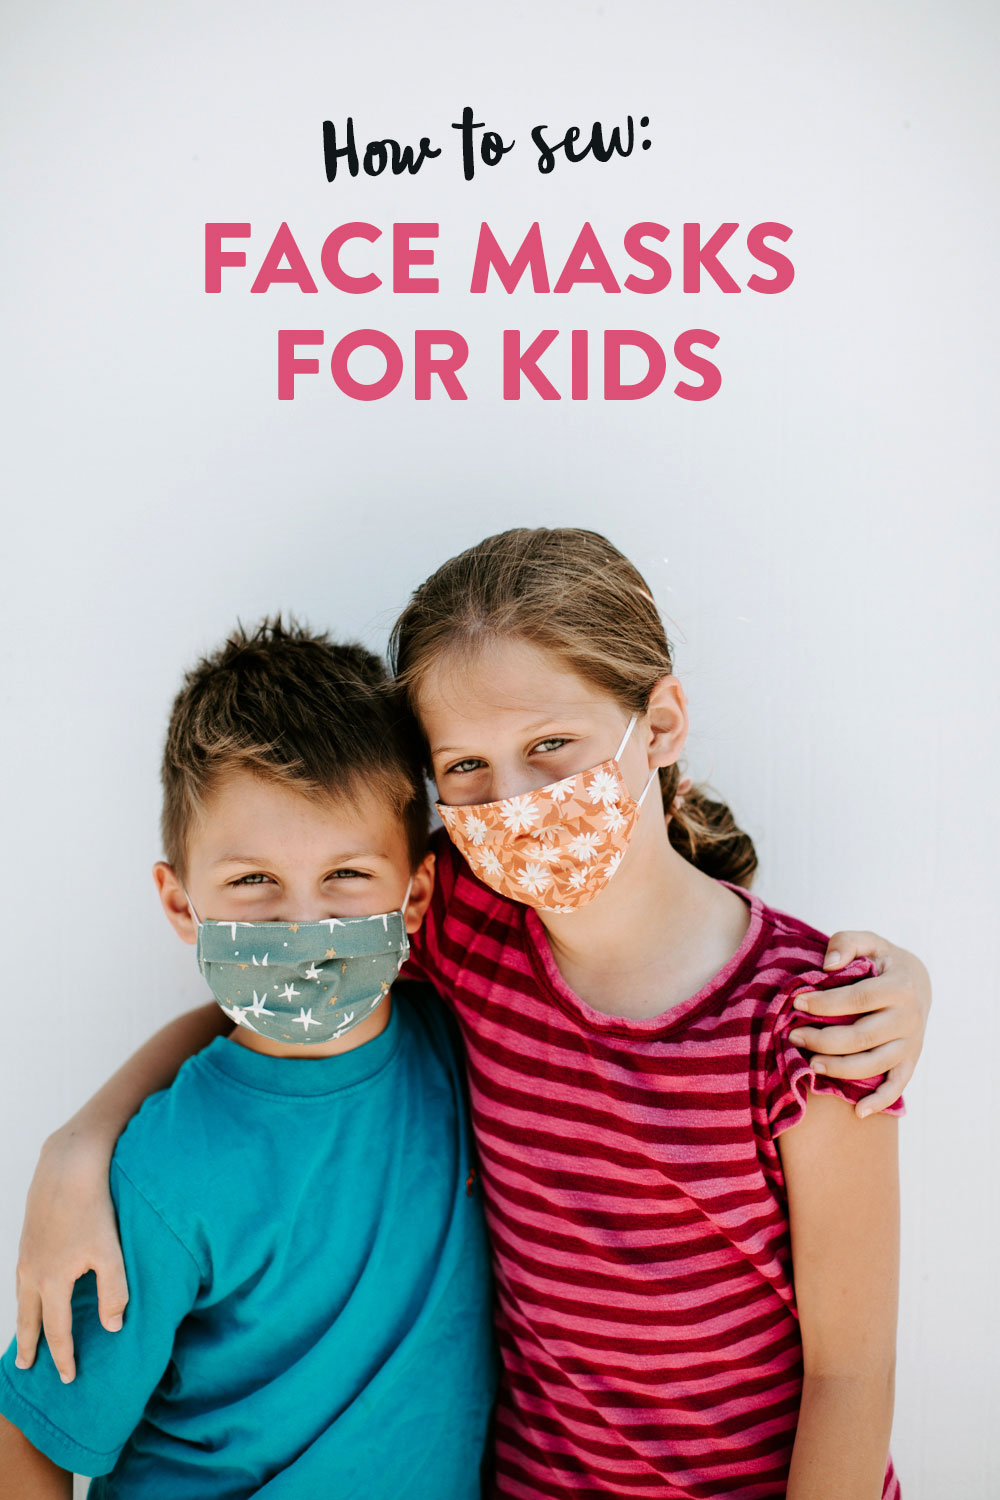 Learn how to make comfortable face masks for kids in this easy sewing tutorial! All you need is a little bit of fabric and some elastic. suzyquilts.com #facemasks #kidfacemask